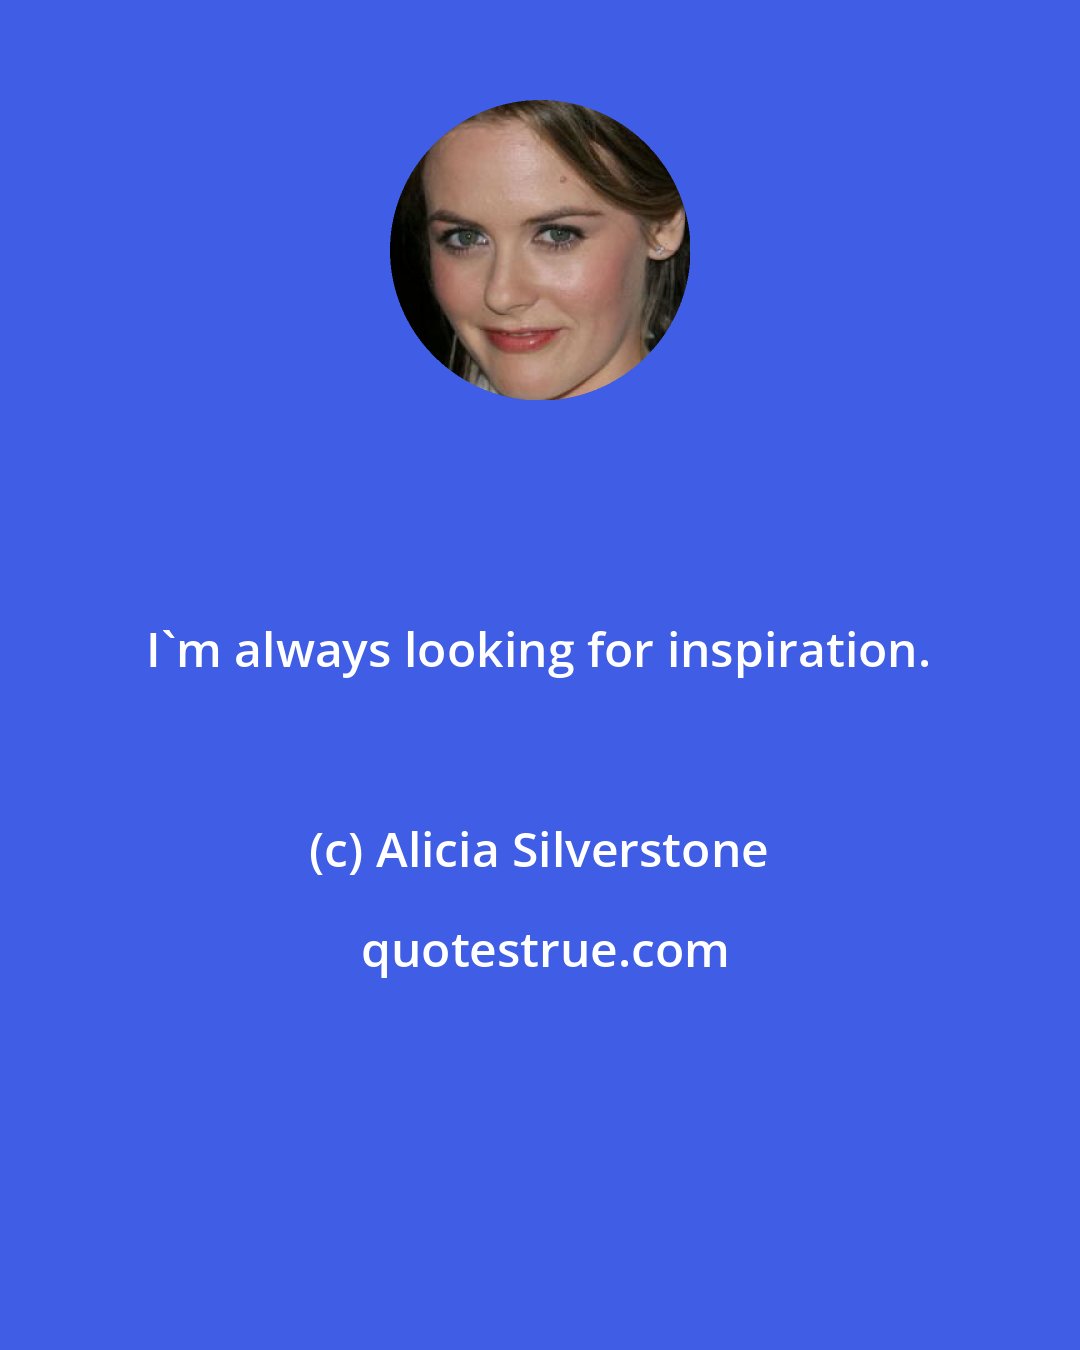 Alicia Silverstone: I'm always looking for inspiration.